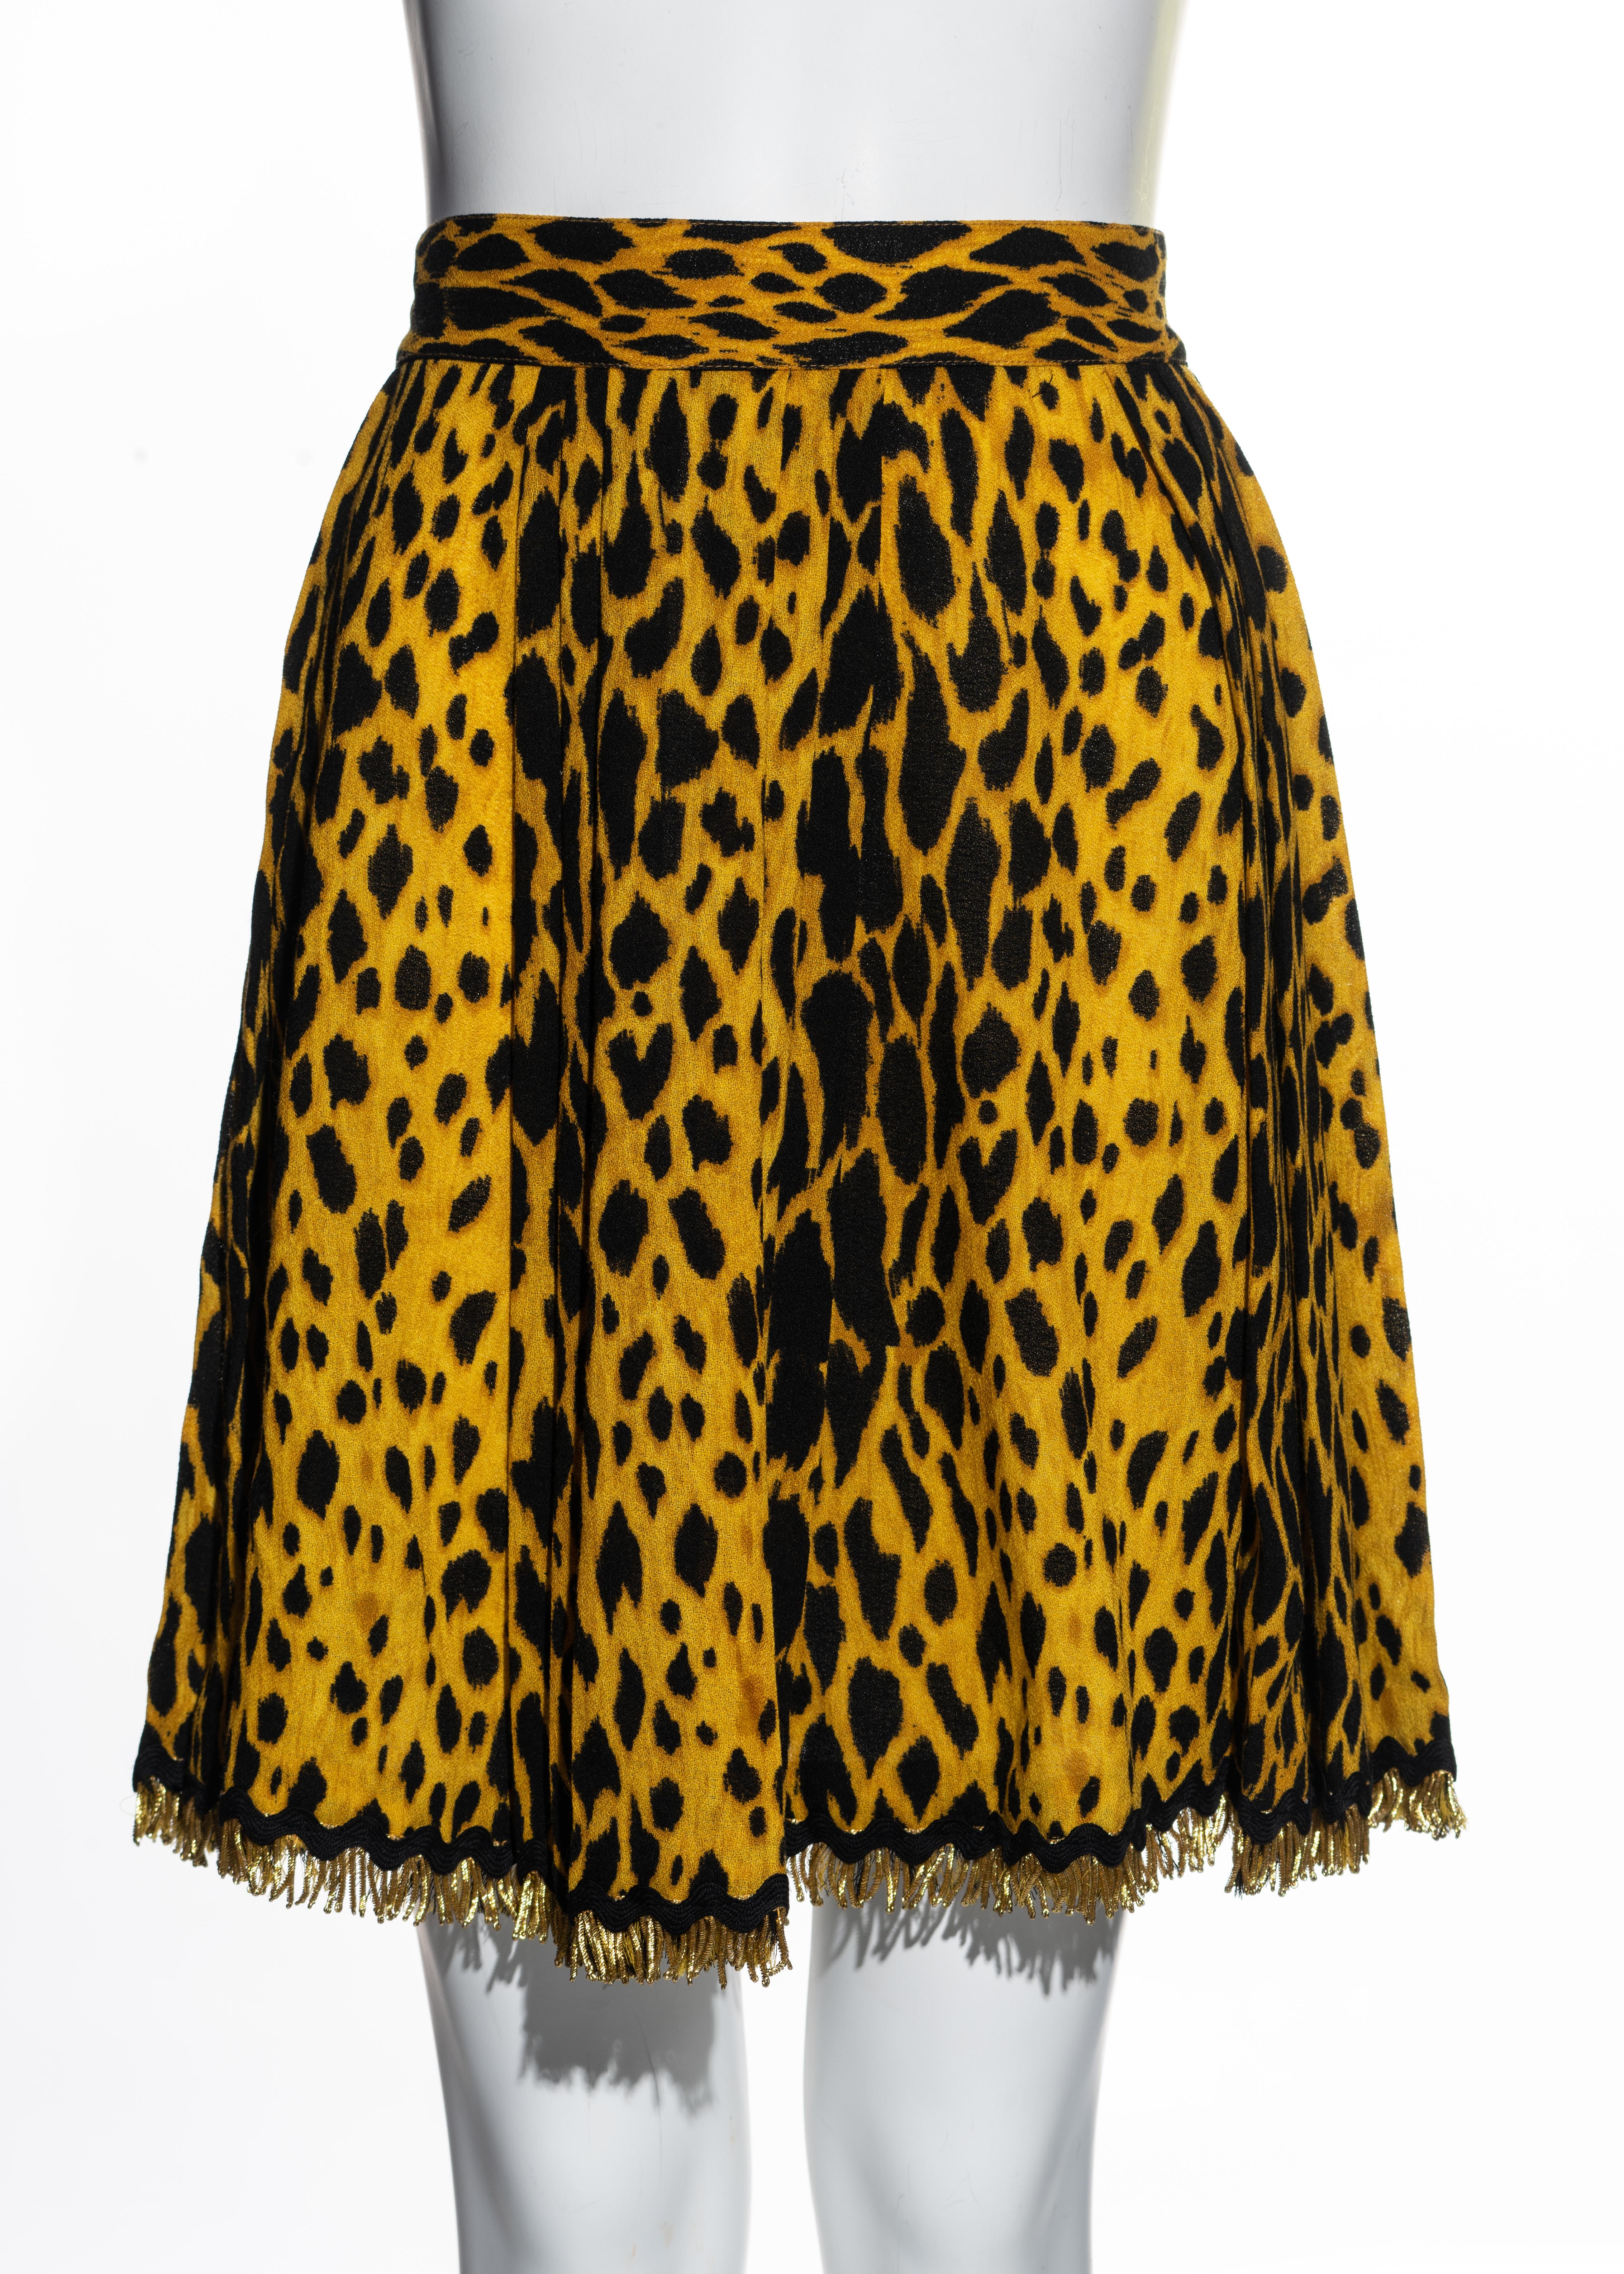 ▪ Gianni Versace wool crepe wrap skirt 
▪ Black cheetah print with yellow place 
▪ Gold fringed trim 
▪ Flat pleats 
▪ IT 42 - FR 38 - UK 10 - US 6
▪ Spring-Summer 1992